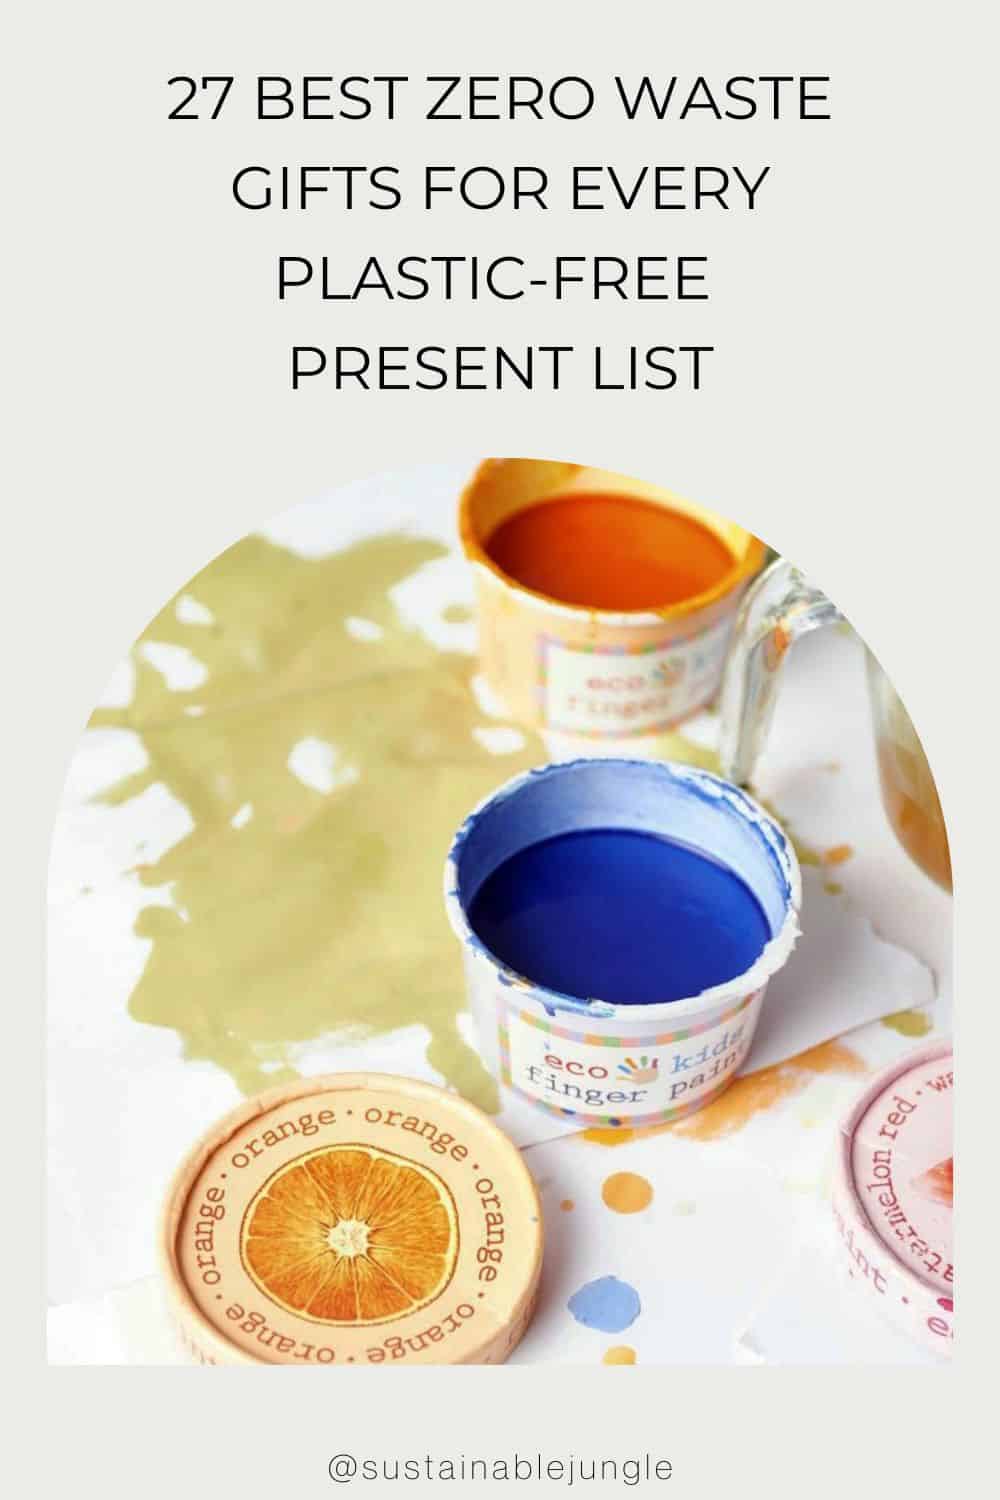 27 Best Zero Waste Gifts For Every Plastic-Free Present List Image by eco-kids #zerowastegifts #bestzerowastegifts #zerowasteChristmasgifts #zerowastegiftideas #plasticfreegifts #giftsforplasticfreeliving #sustainablejungle